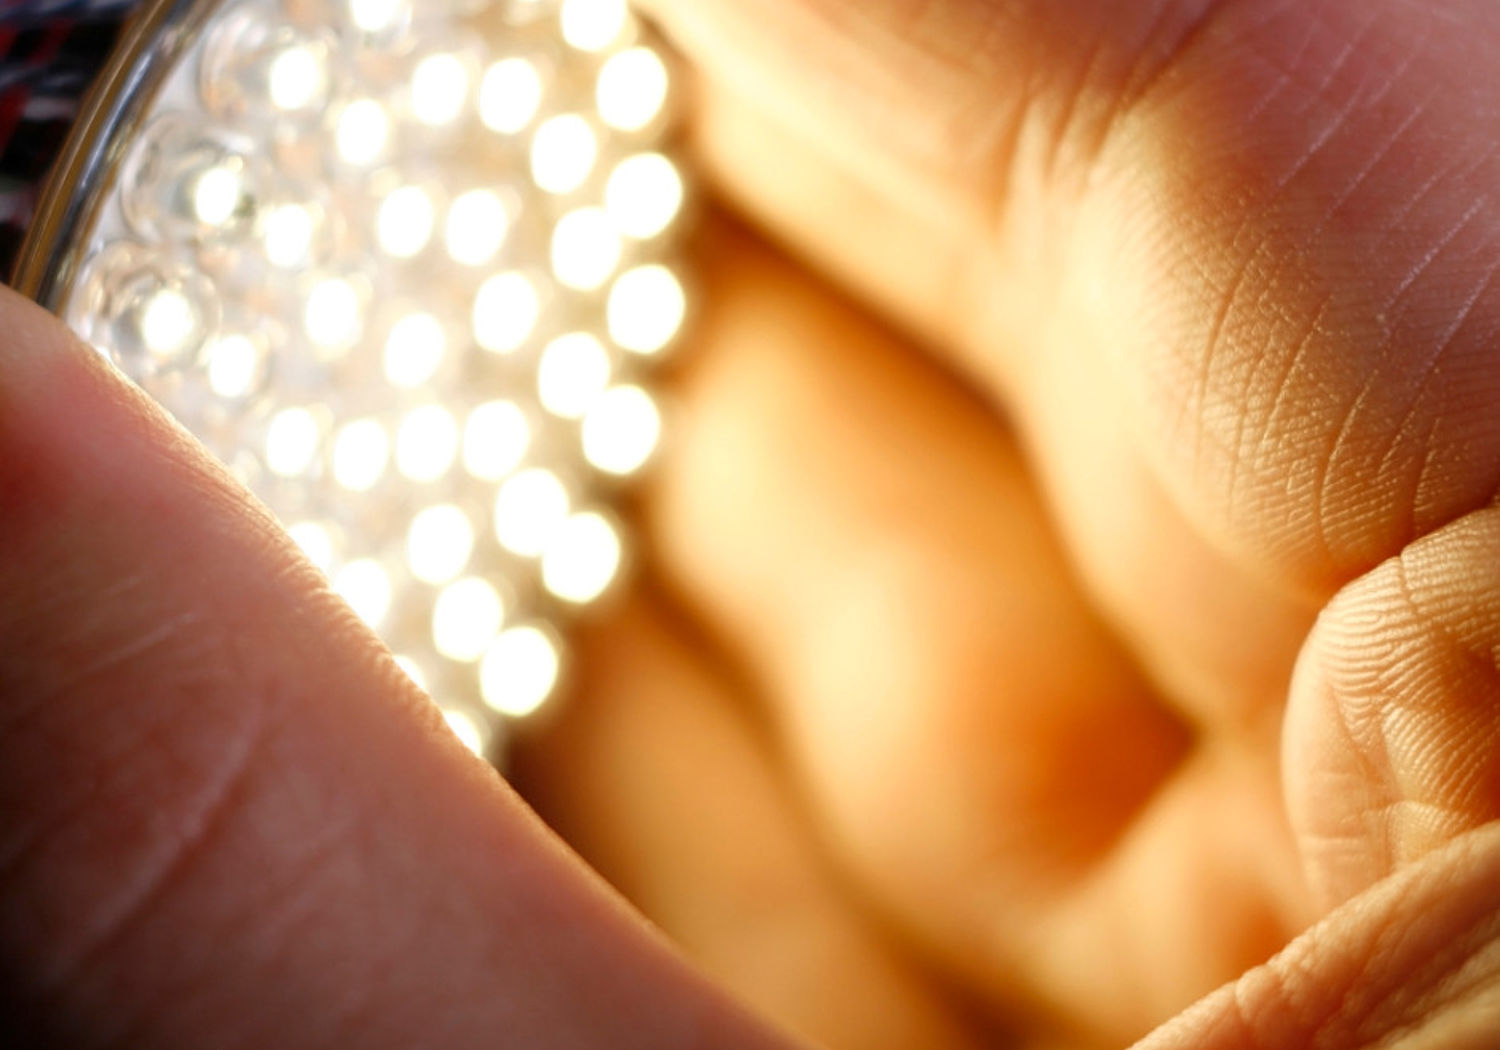 Image showing a white LED in a hand